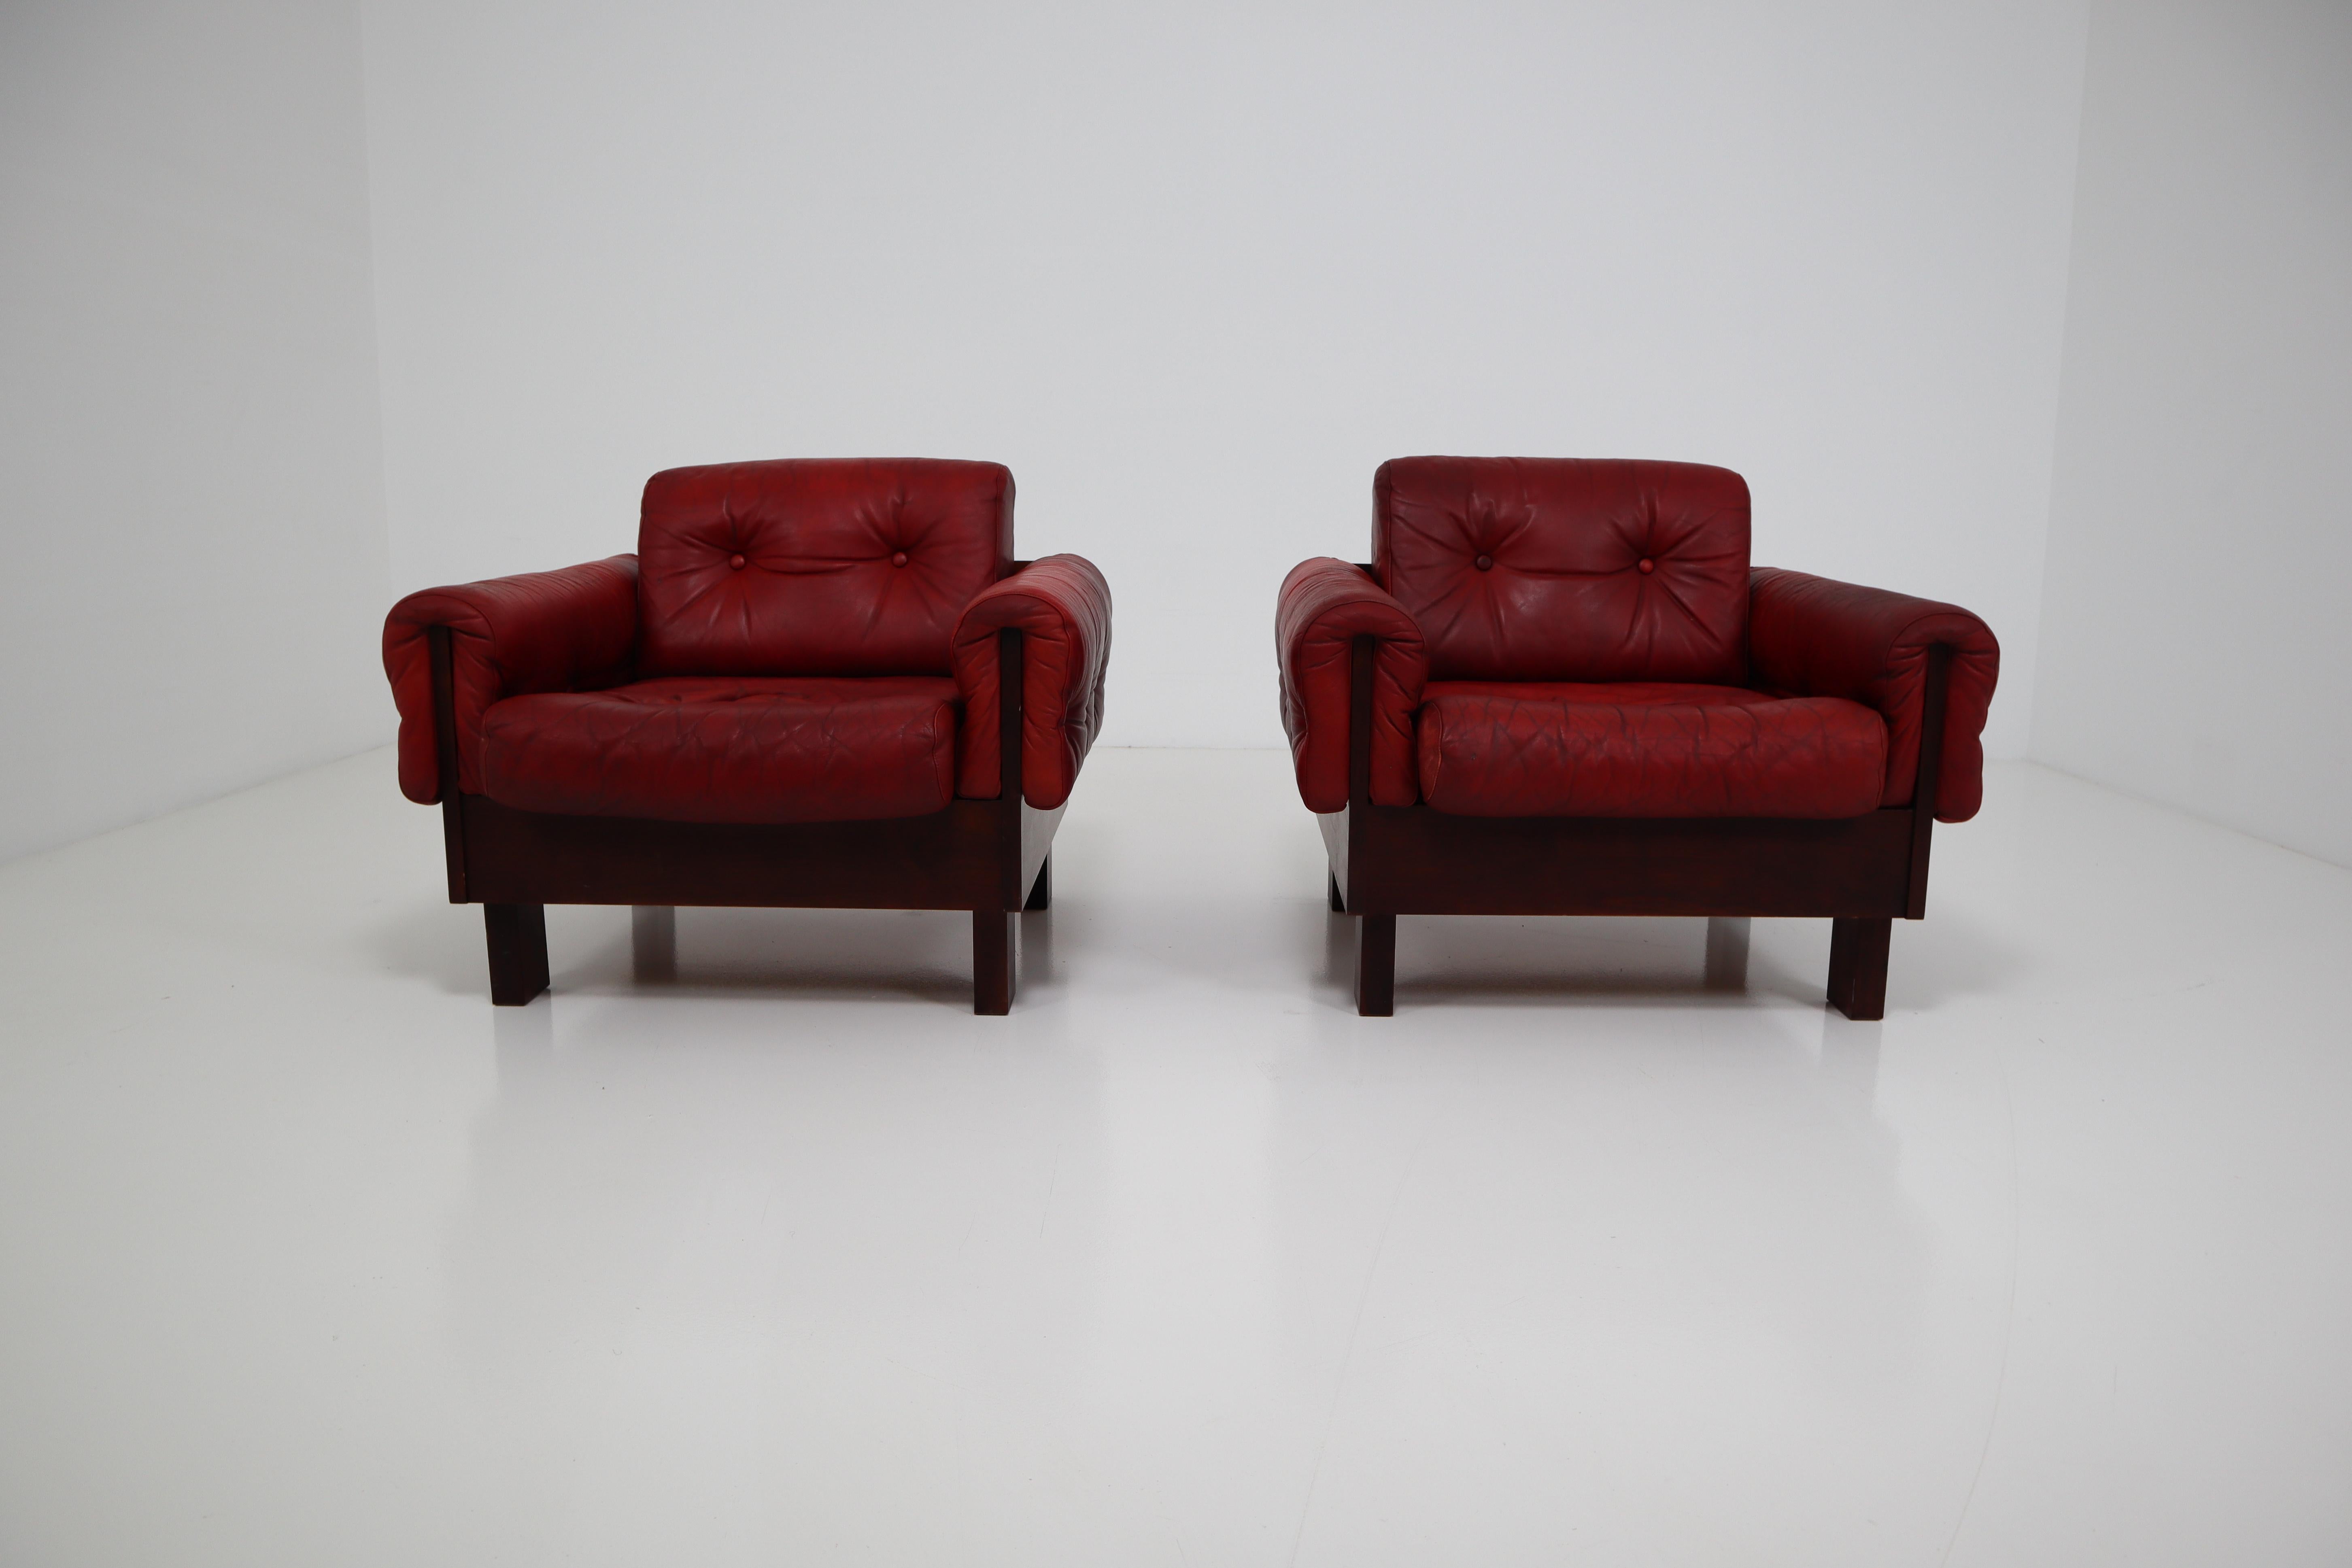 Mid-Century Modern Lounge Chairs with Tufted Red Leather, Austria, 1970s